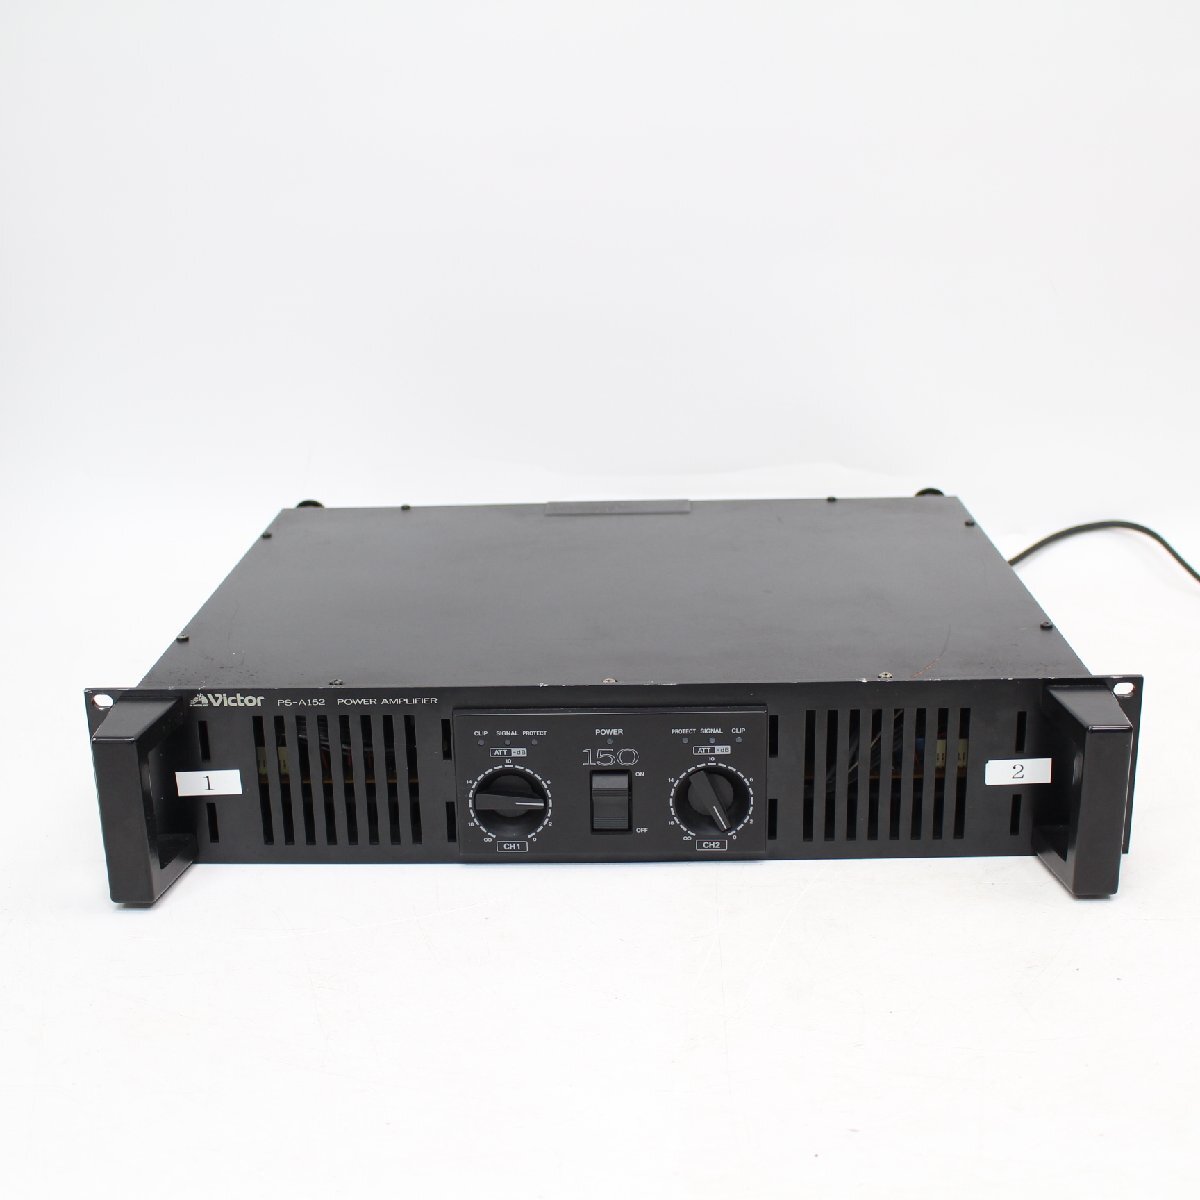 439)Victor ビクター VOSS 2ch パワーアンプ PS-A152 POWER AMPLIFIER ケース付き_画像2